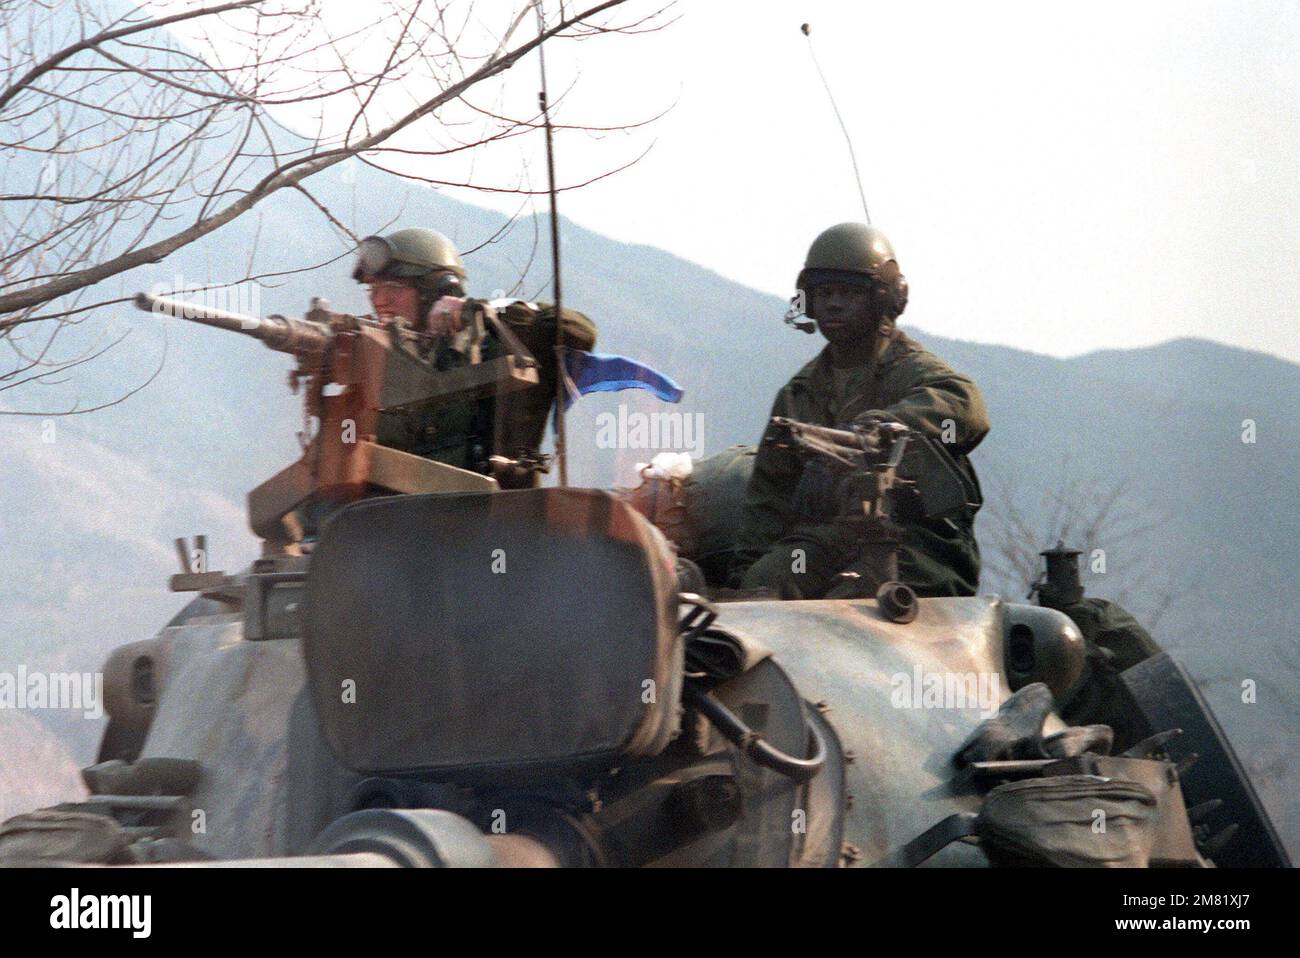 US Army personnel aboard an M-48A5 main battle tank during the joint South Korea/US Exercise Team Spirit '84. The soldier at left mans an anti-aircraft machine gun. Subject Operation/Series: Team Spirit '84 Country: Republic Of Korea (KOR) Stock Photo